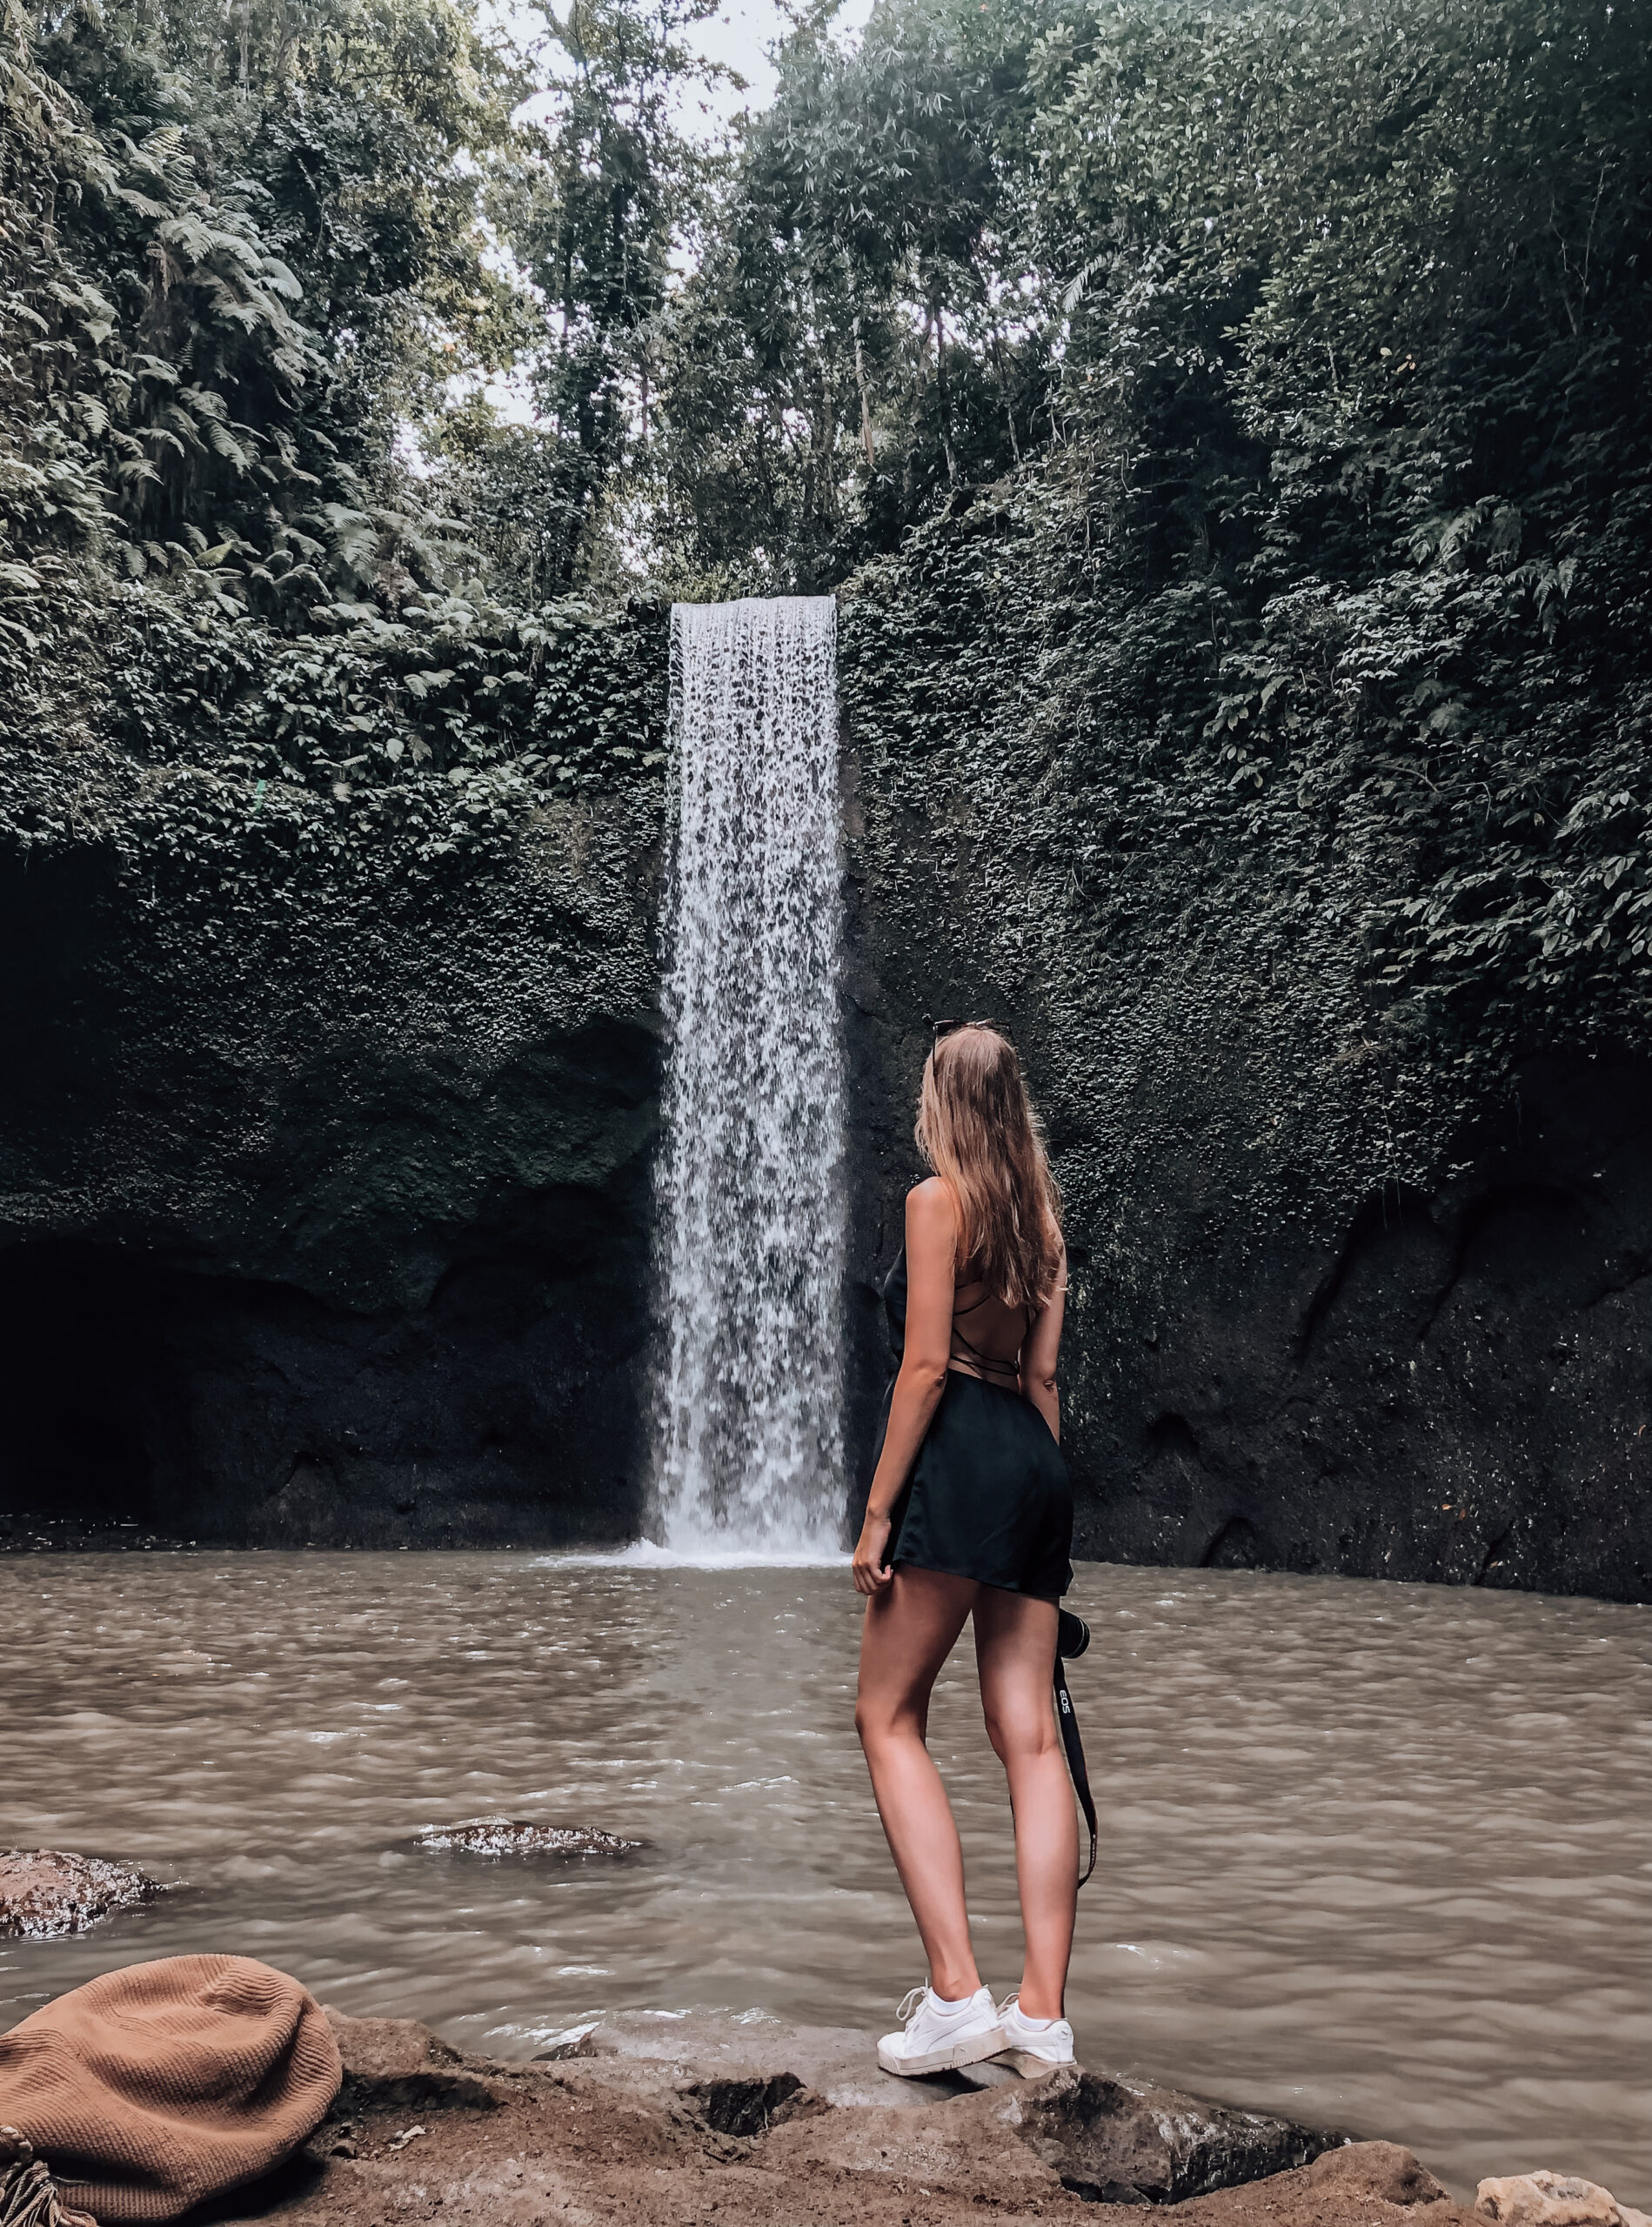 Waterfalls, Monkey’s and the sunrise over Mount Batur in Ubud – Indonesia Travel Diary